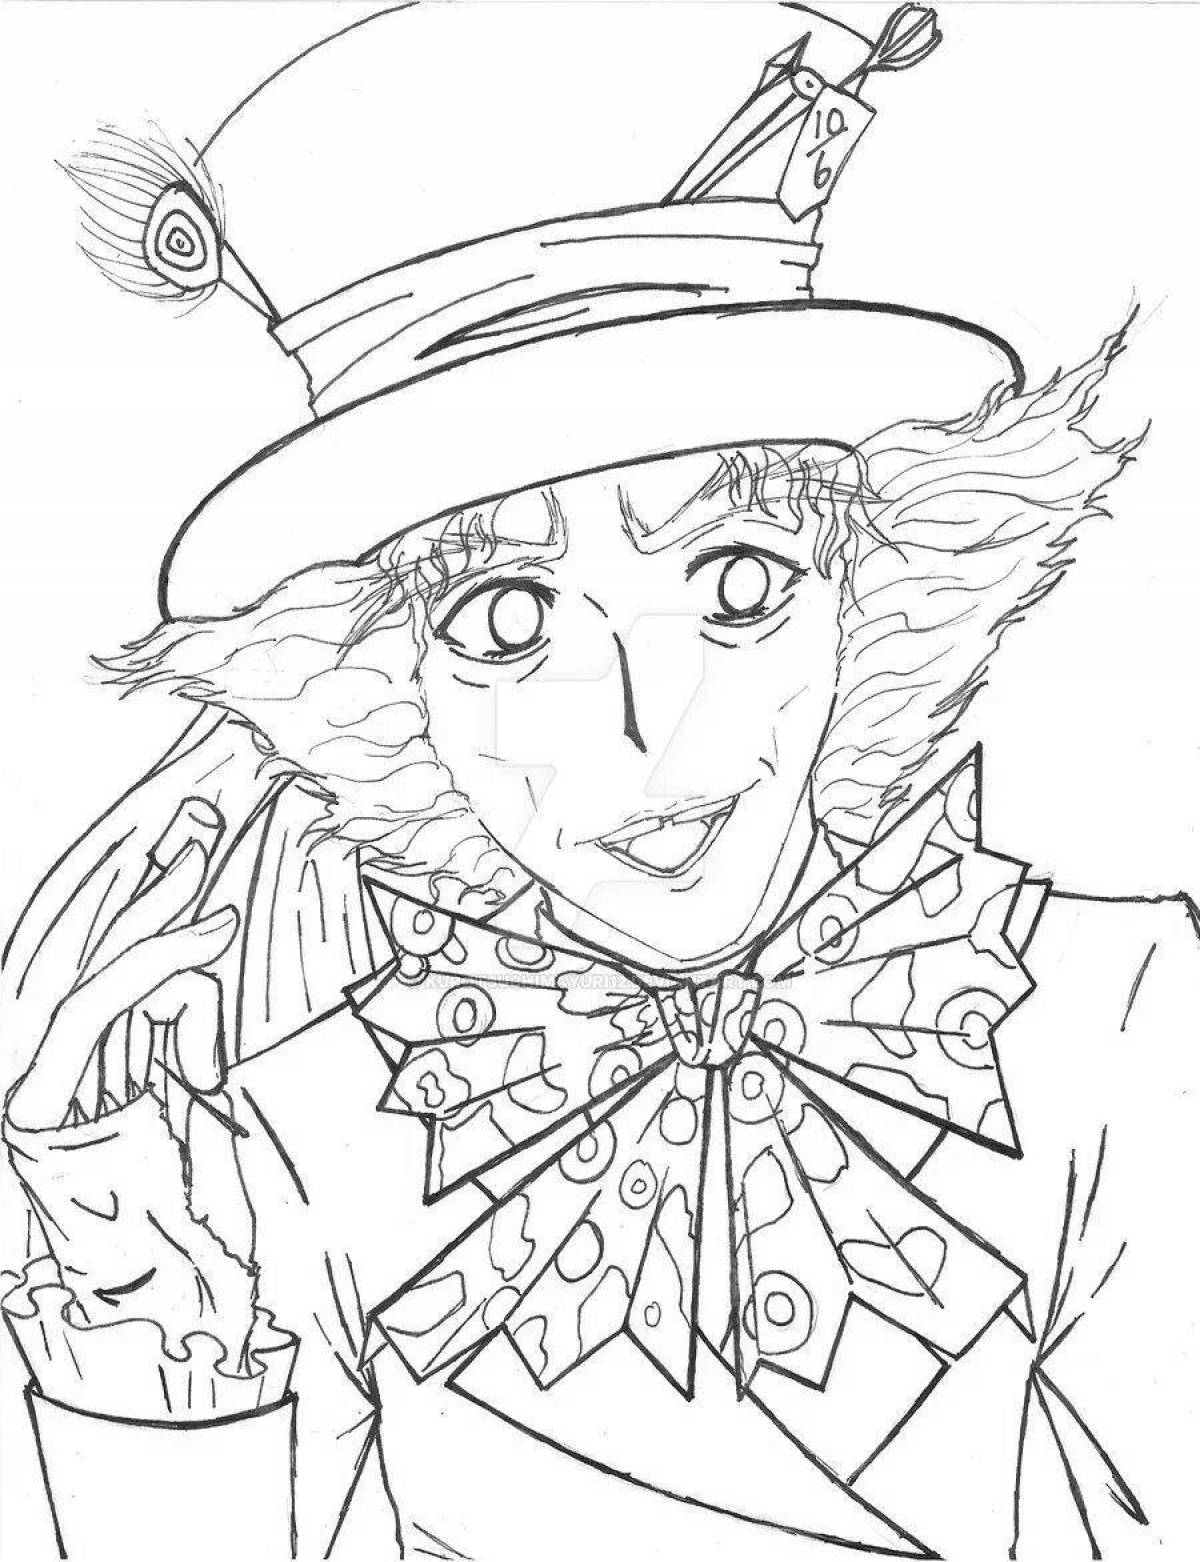 Colourful hatter coloring page